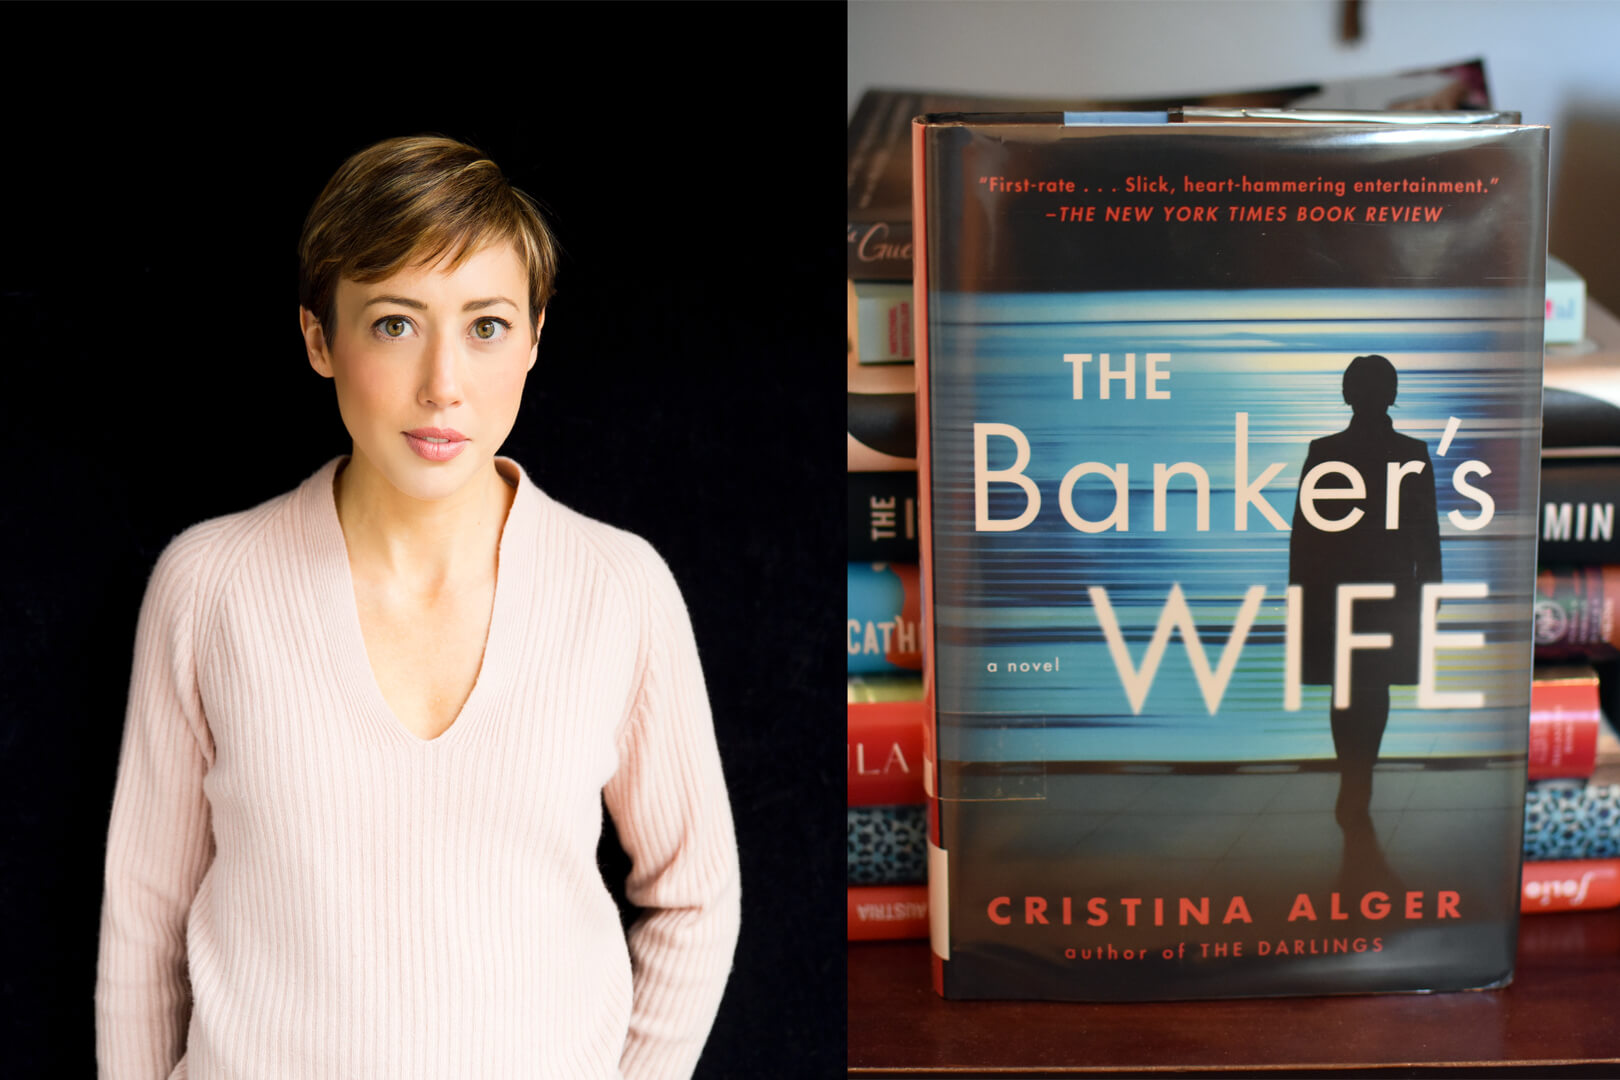 Q&A with Cristina Alger, Author of The Banker’s Wife